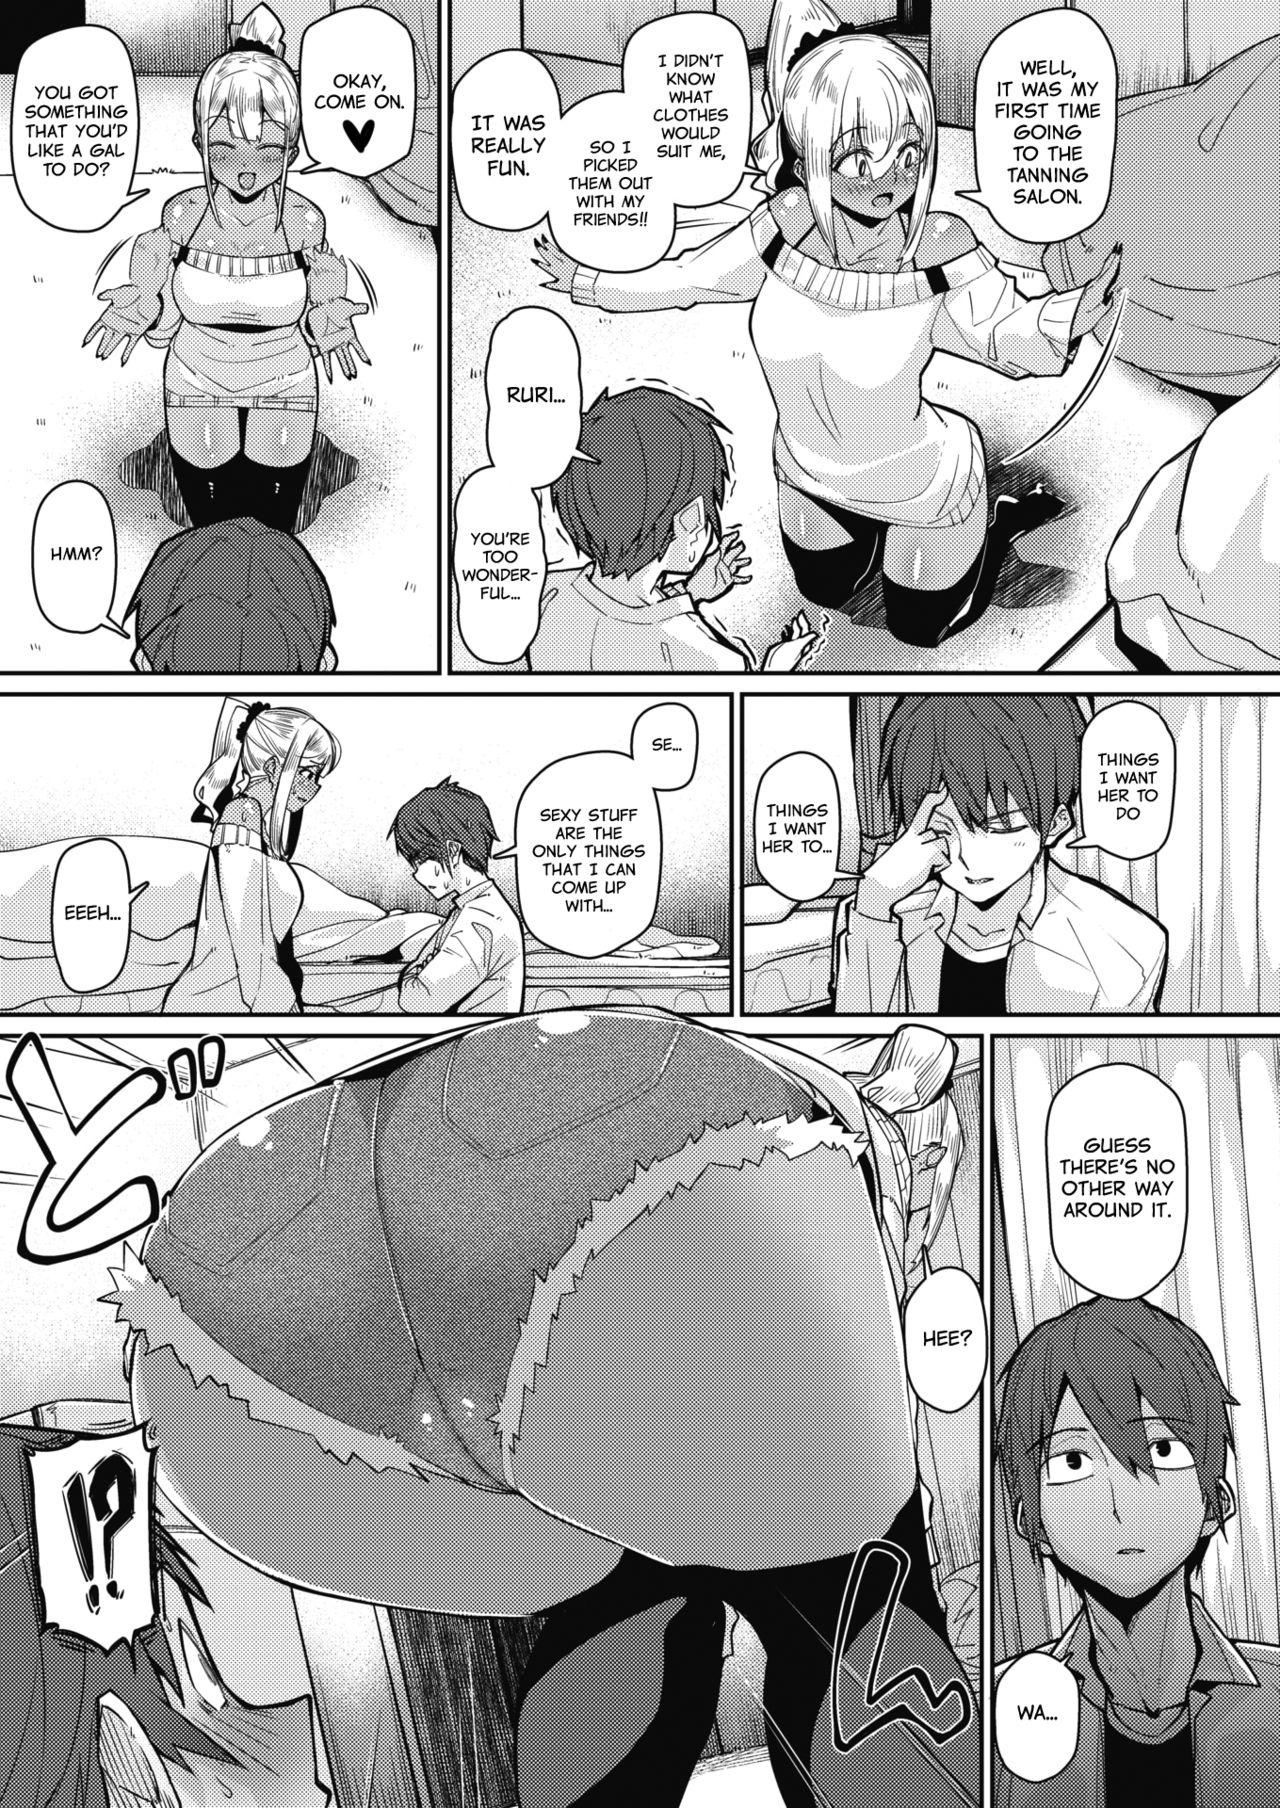 Pussyfucking Gekkan "The Bitch" o Mita Onna no Hannou ni Tsuite | About the Reaction of the Girl Who Saw "The Bitch Monthly" Big Dick - Page 5